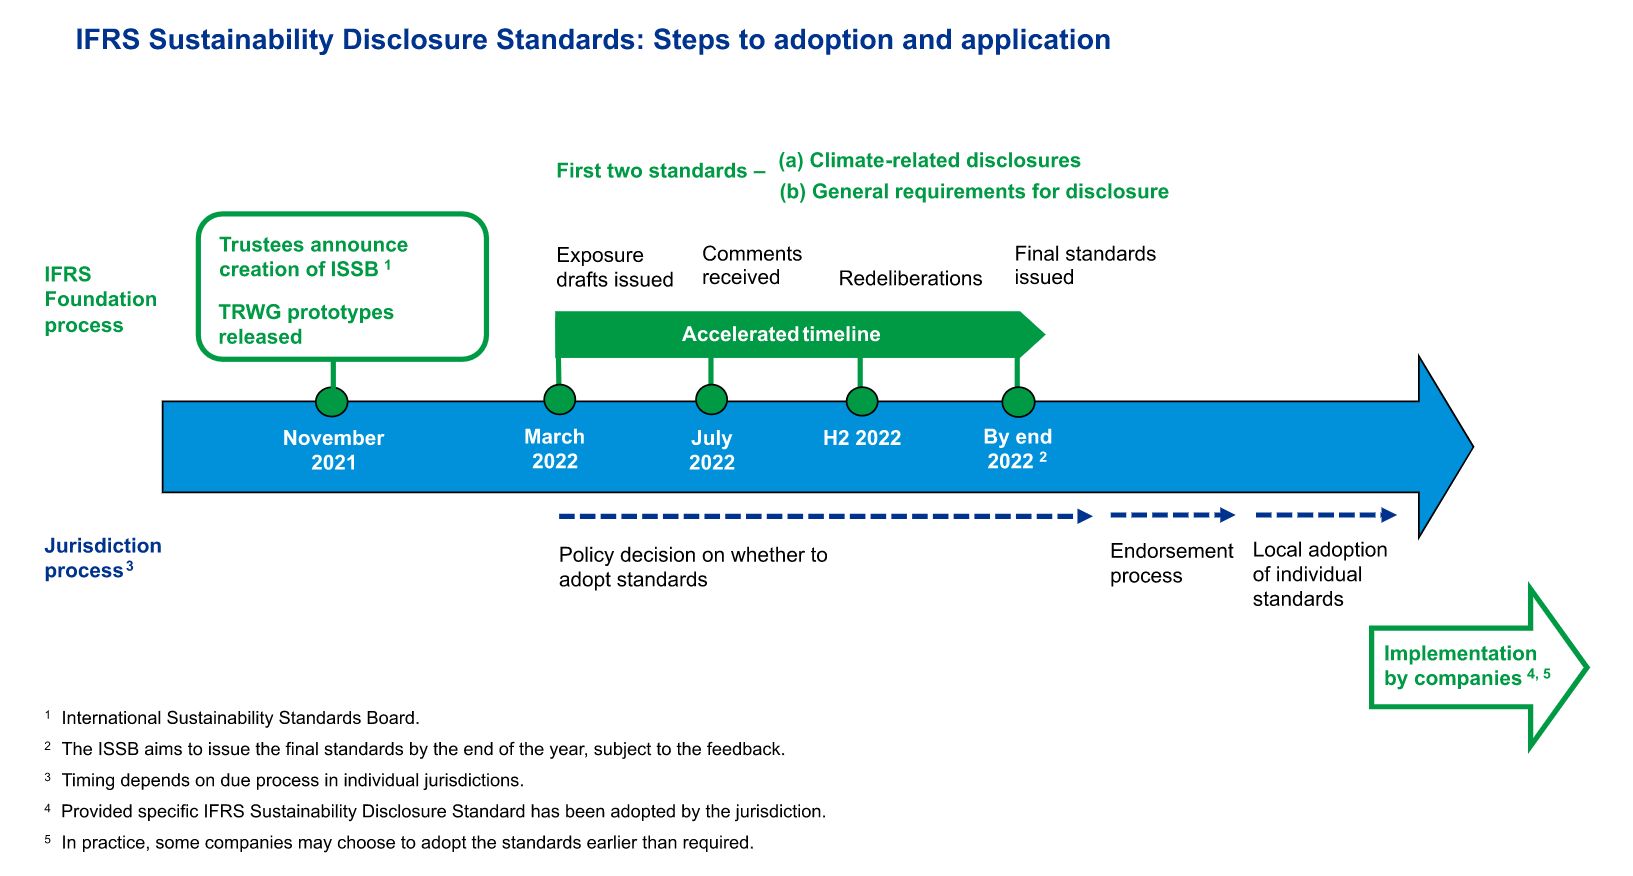 Steps to adoption and application